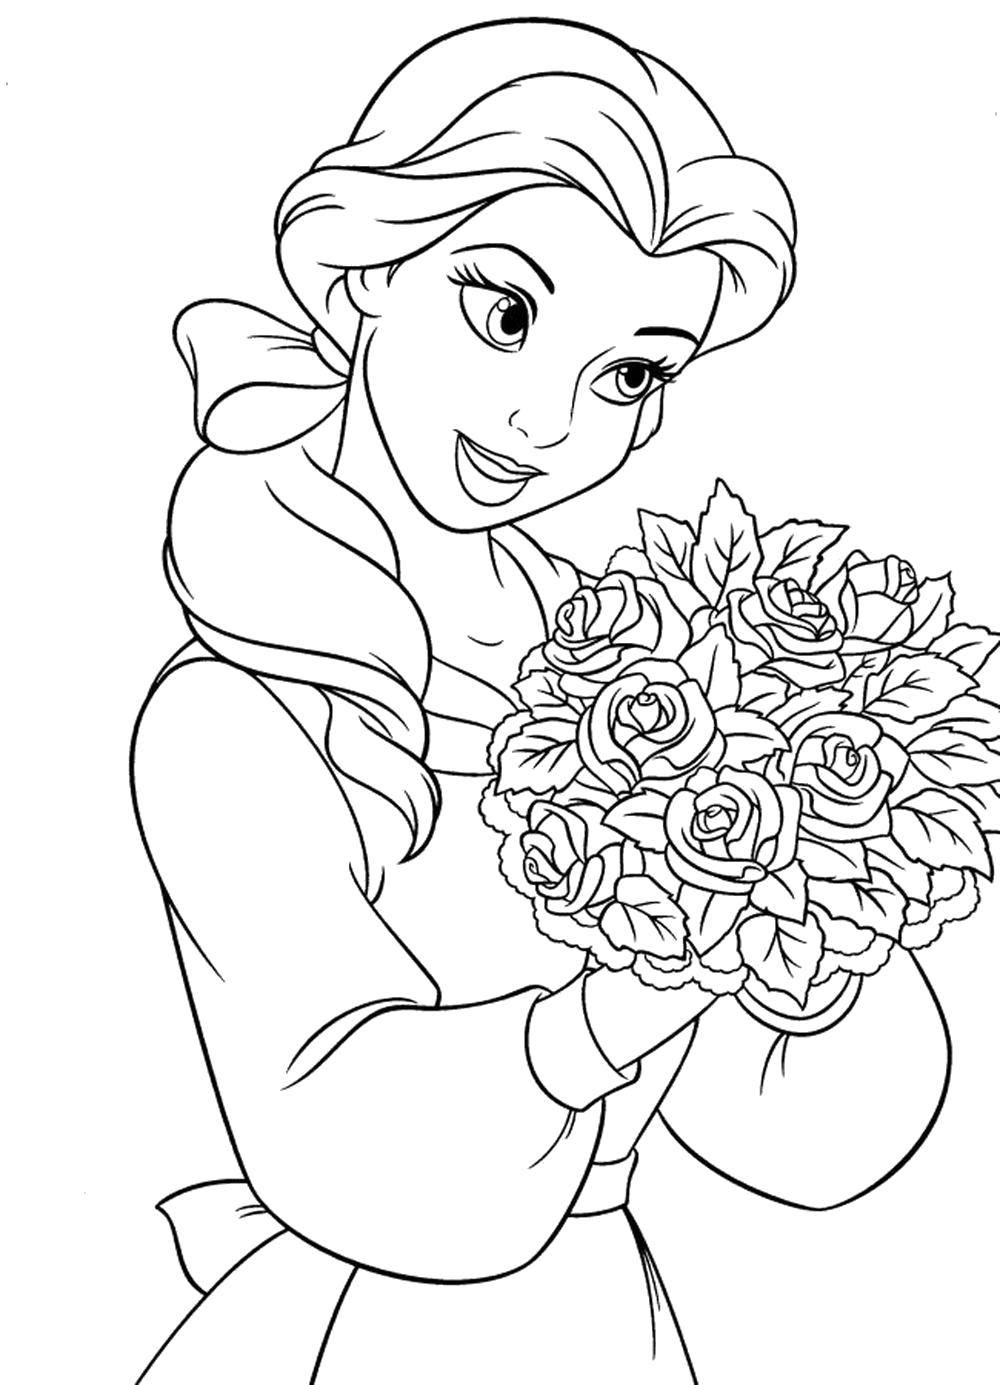 Coloring Belle with flowers. Category Disney coloring pages. Tags:  Beauty and the Beast, Disney.